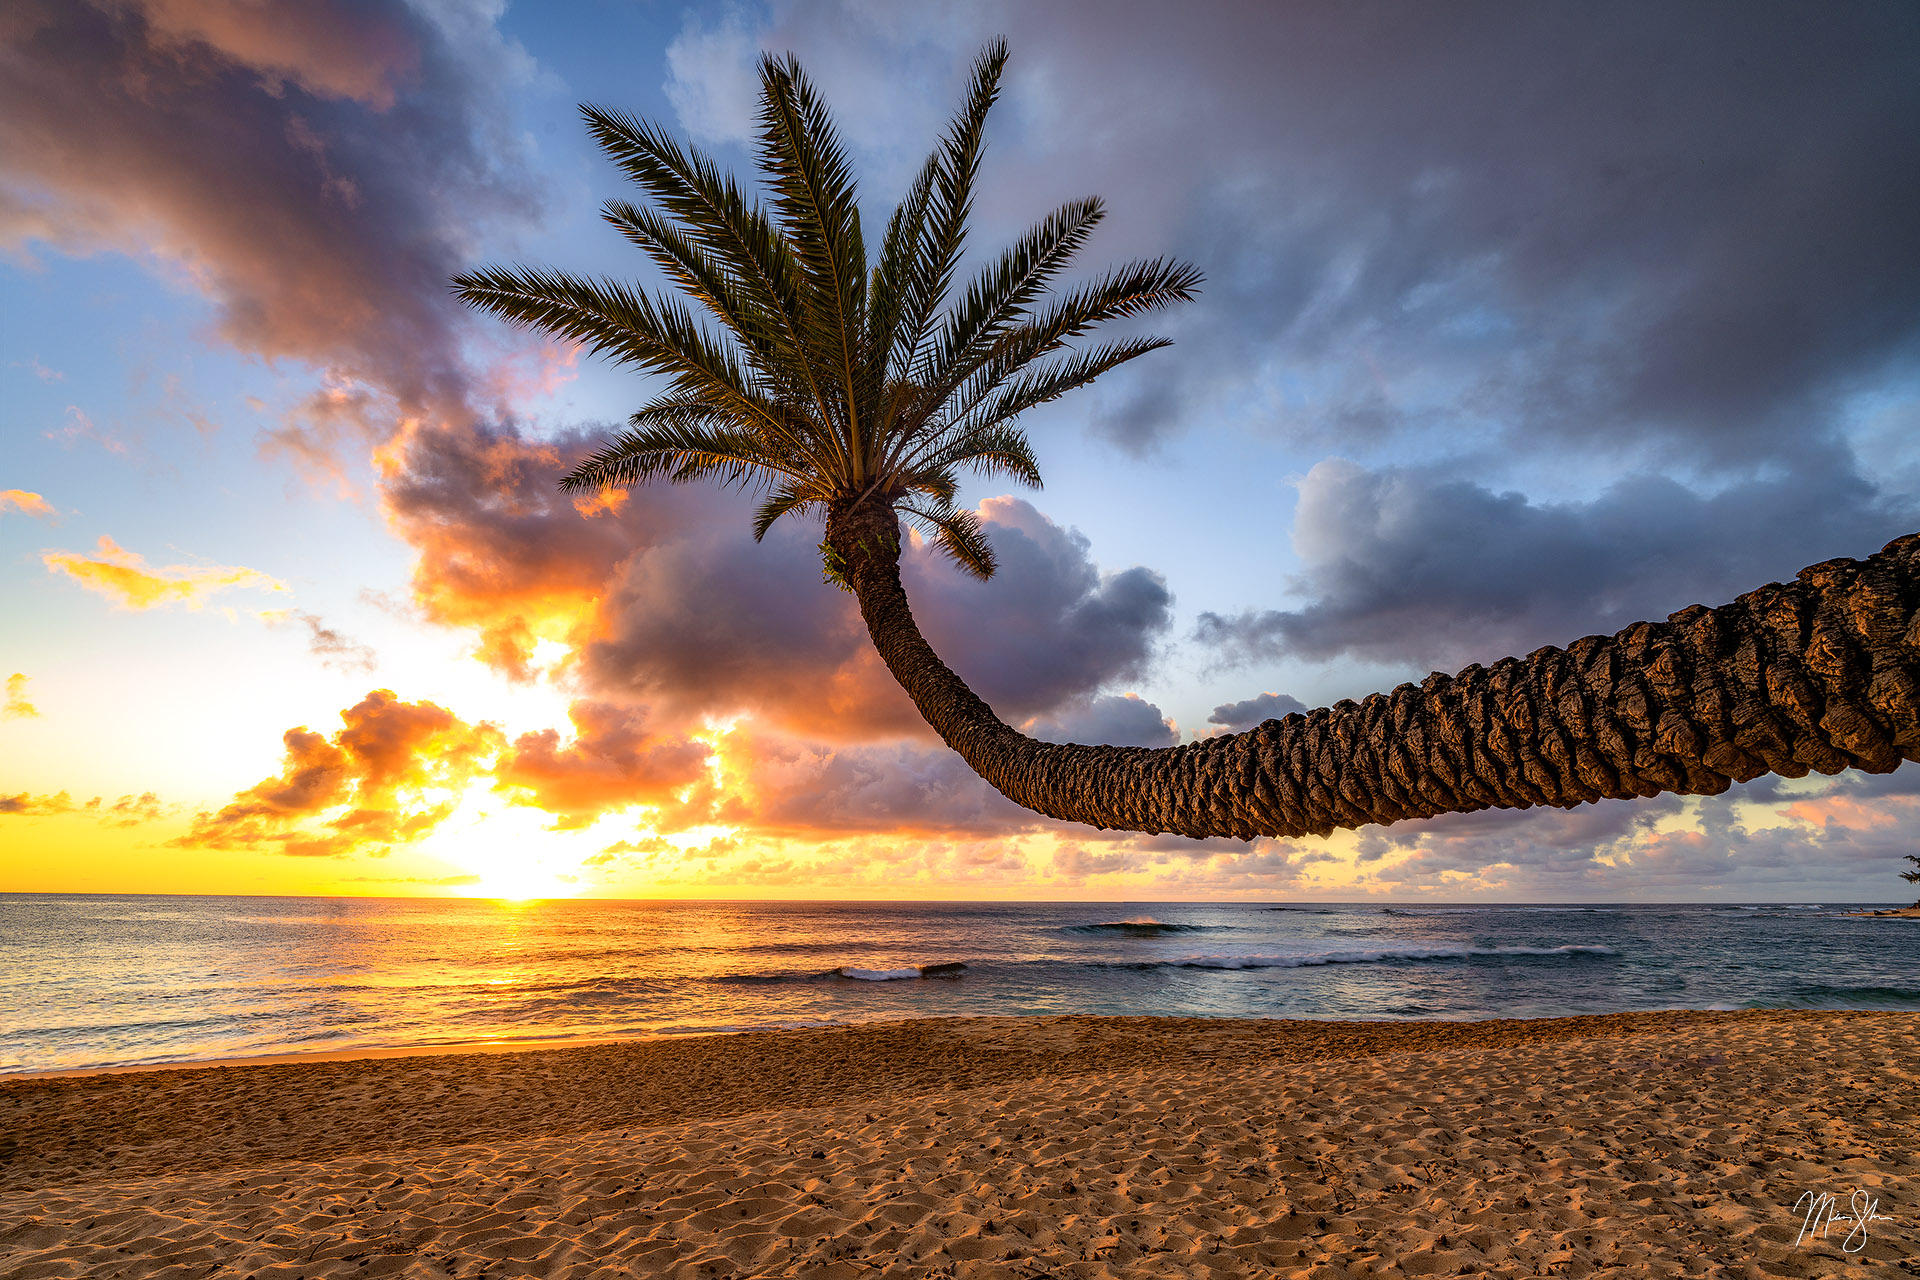 Maui Photography For Sale: North Shore Sunset under a Palm Tree